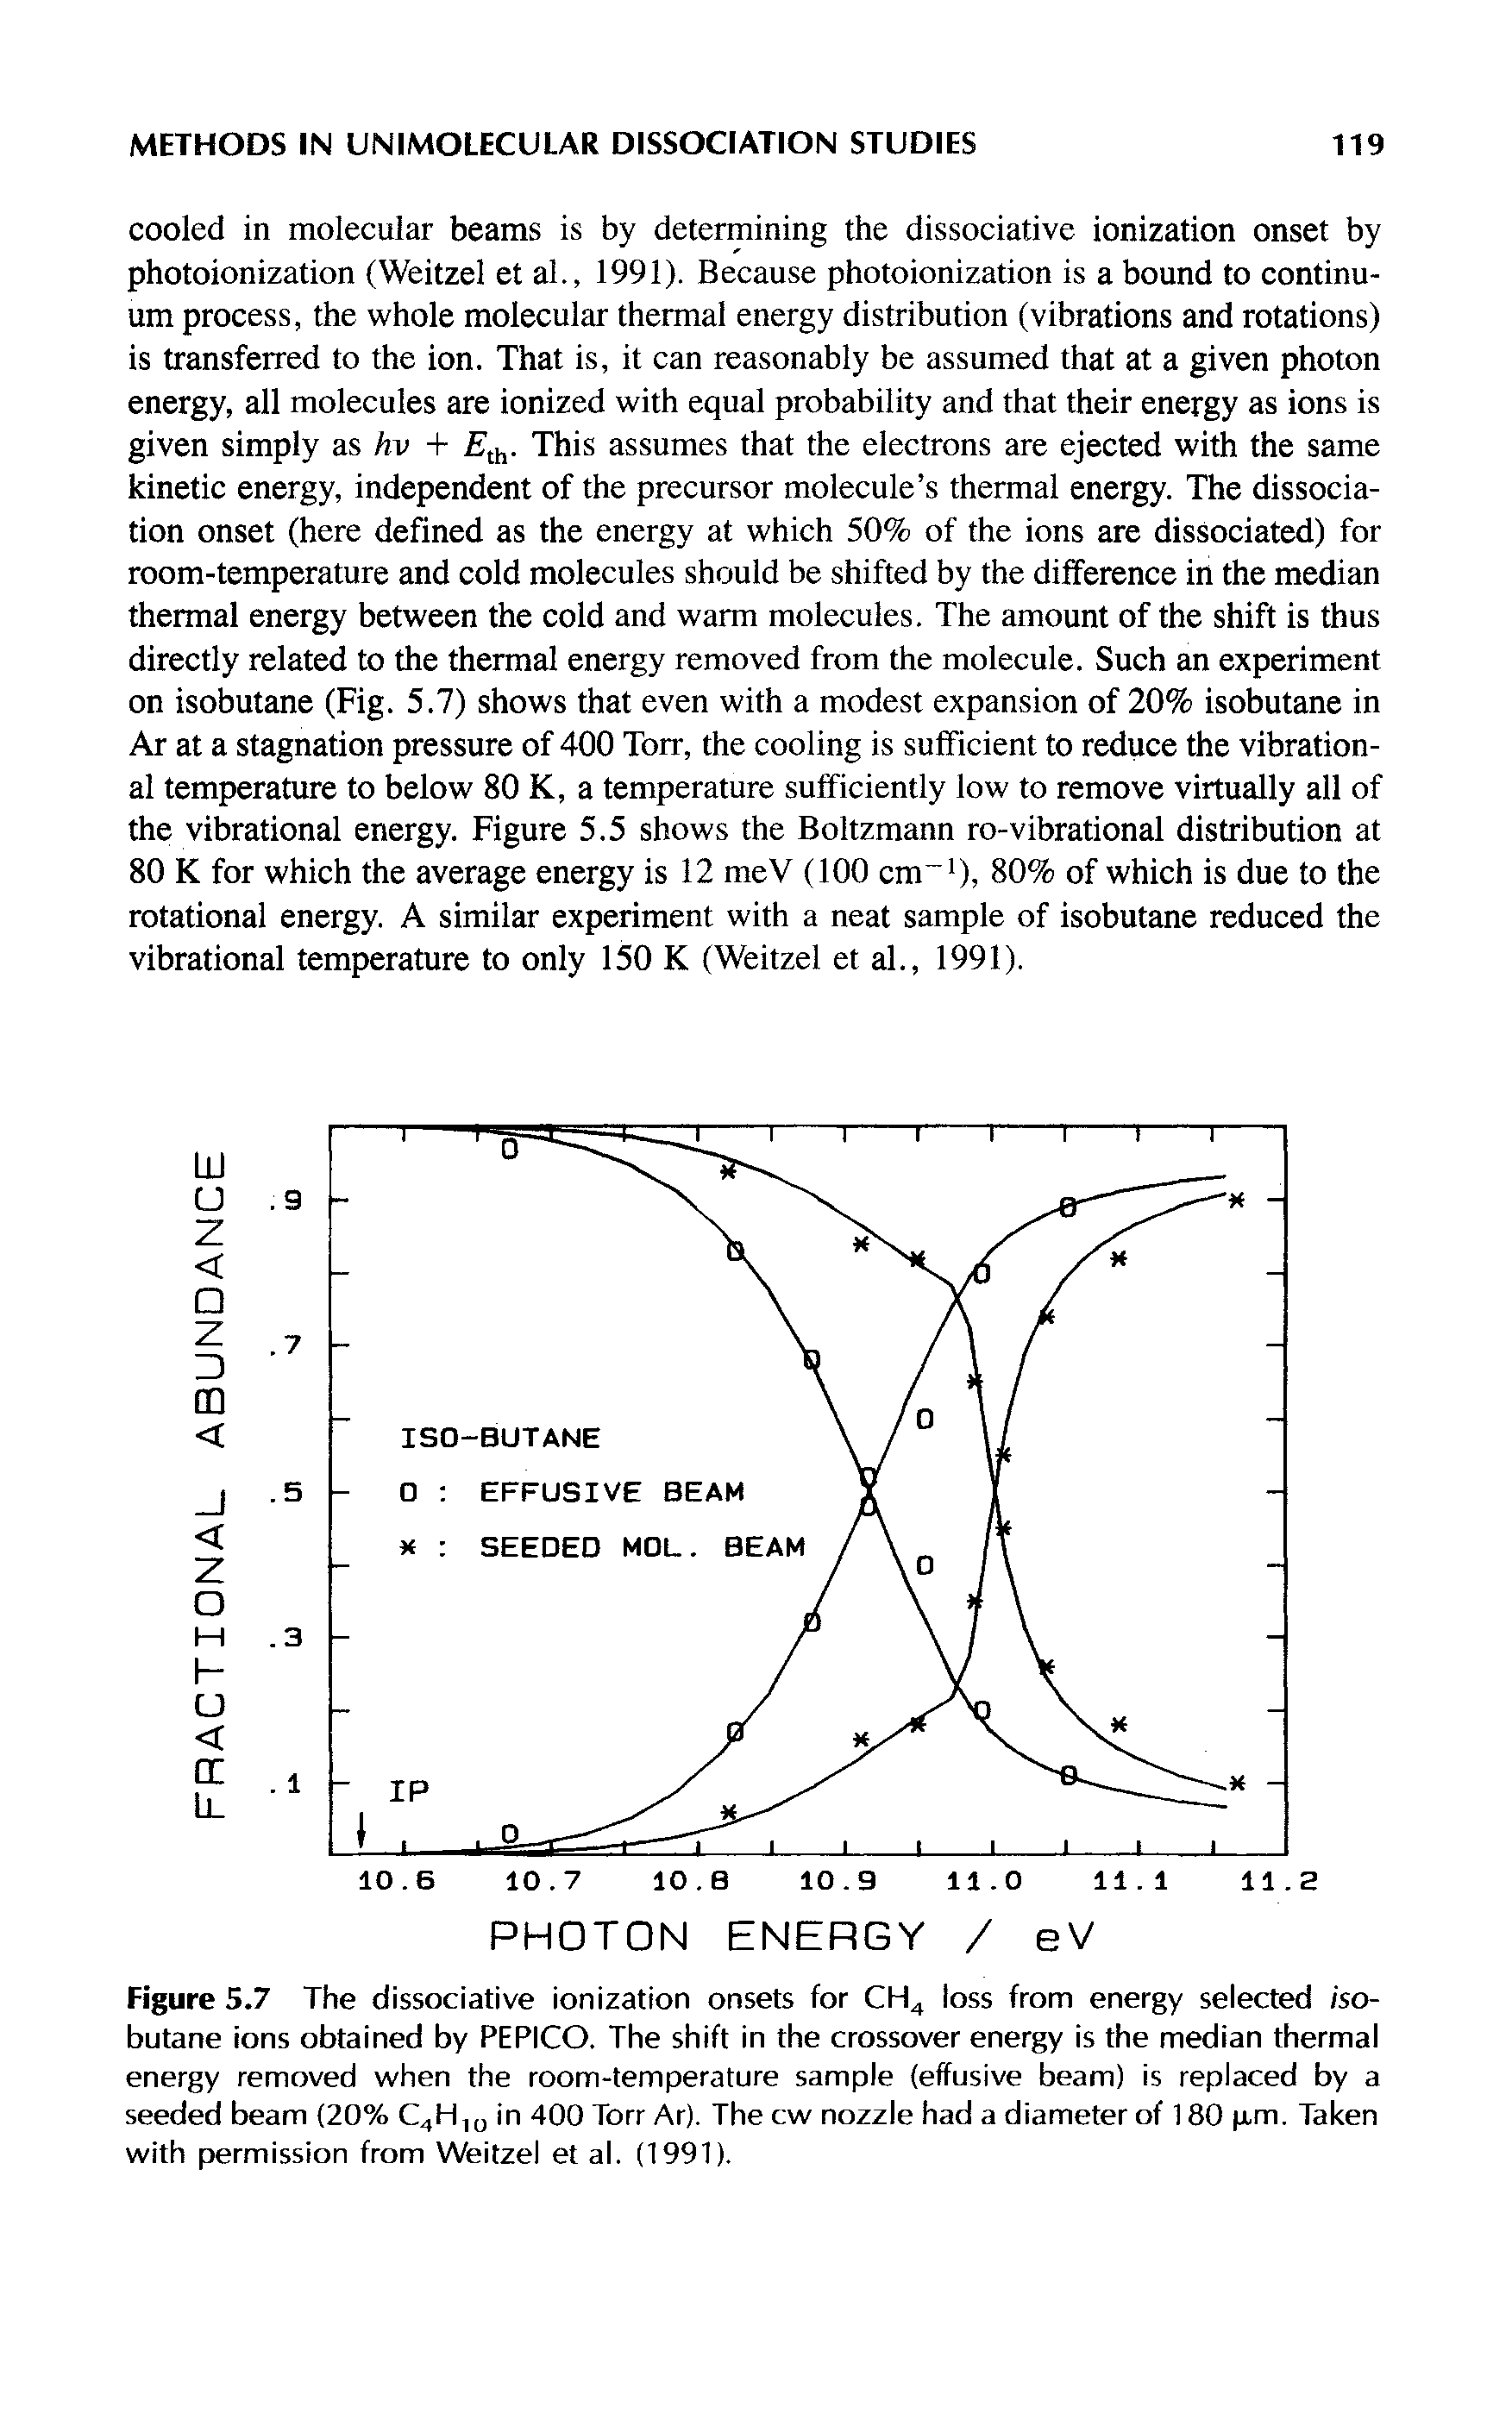 Figure 5.7 The dissociative ionization onsets for CH4 loss from energy selected iso-butane ions obtained by PEPICO. The shift in the crossover energy is the median thermal energy removed when the room-temperature sample (effusive beam) is replaced by a seeded beam (20% C4H,o in 400 Torr Ar). The cw nozzle had a diameter of 180 pm. Taken with permission from Weitzel et al. (1991).